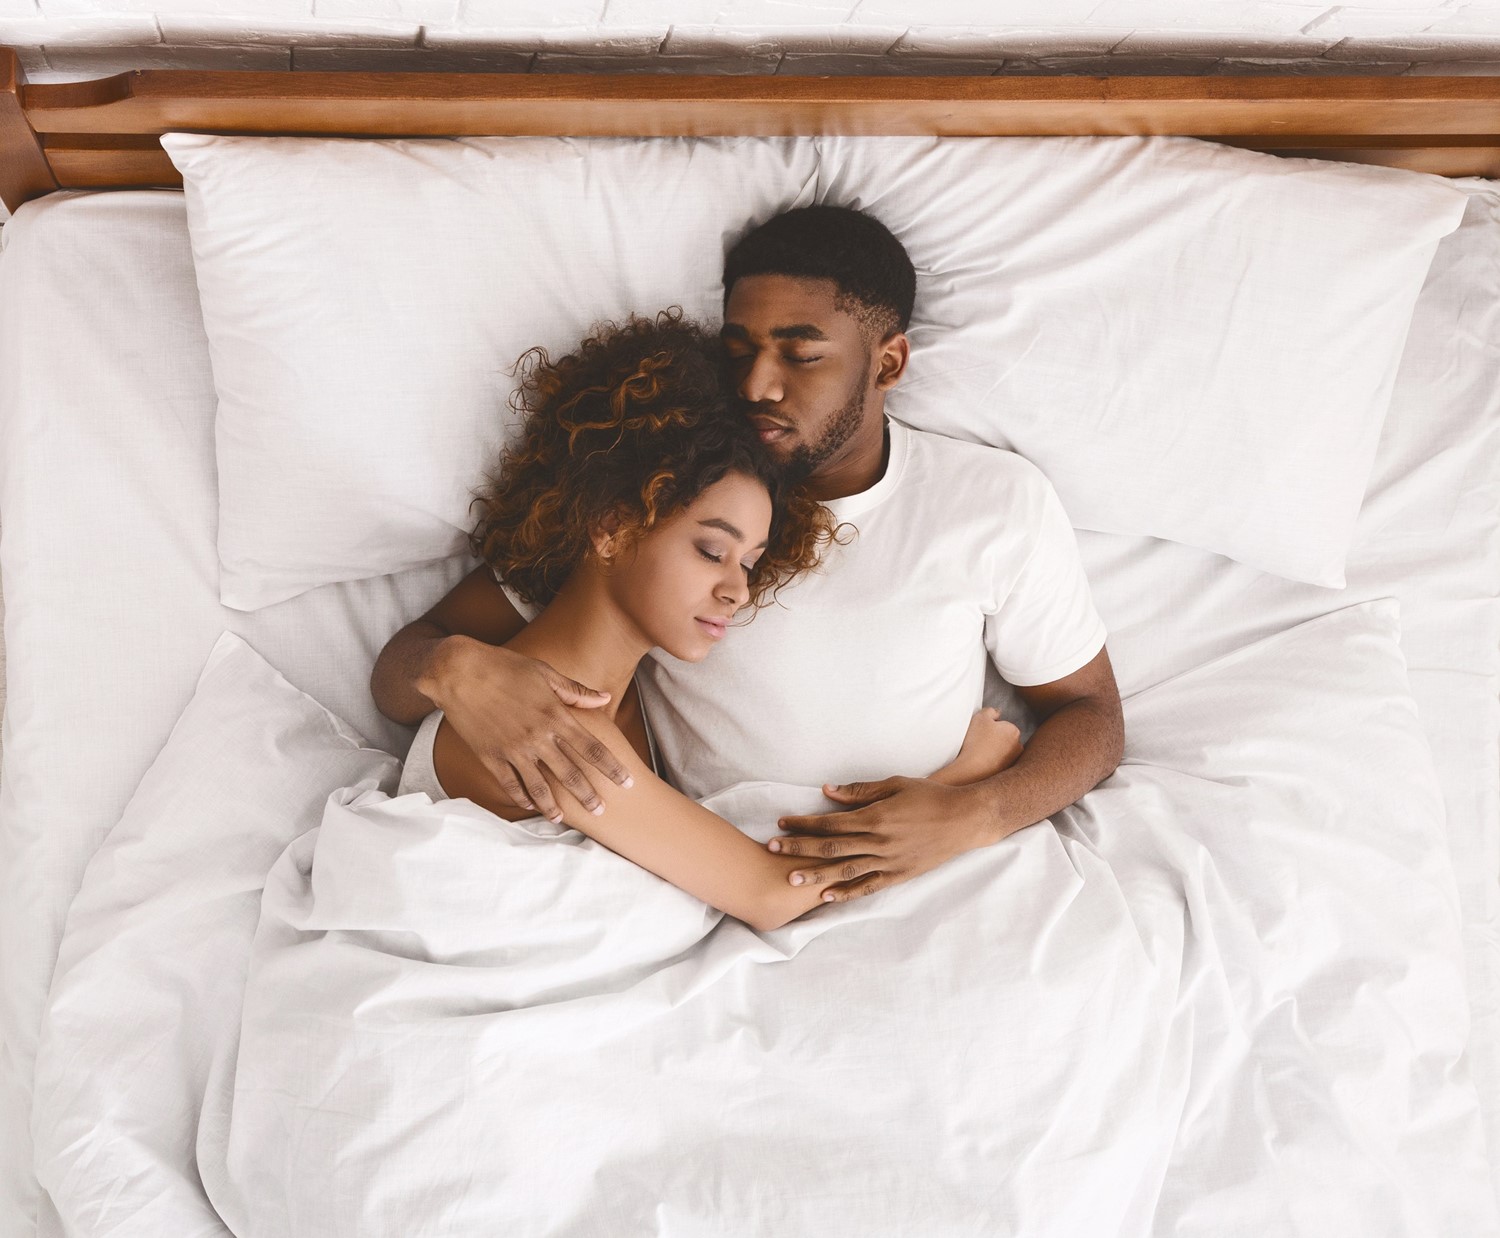 A Young Adult Couple Peacefully Sleeping in an Embrace in White Bedding with a Wooden Headboard Behind Them